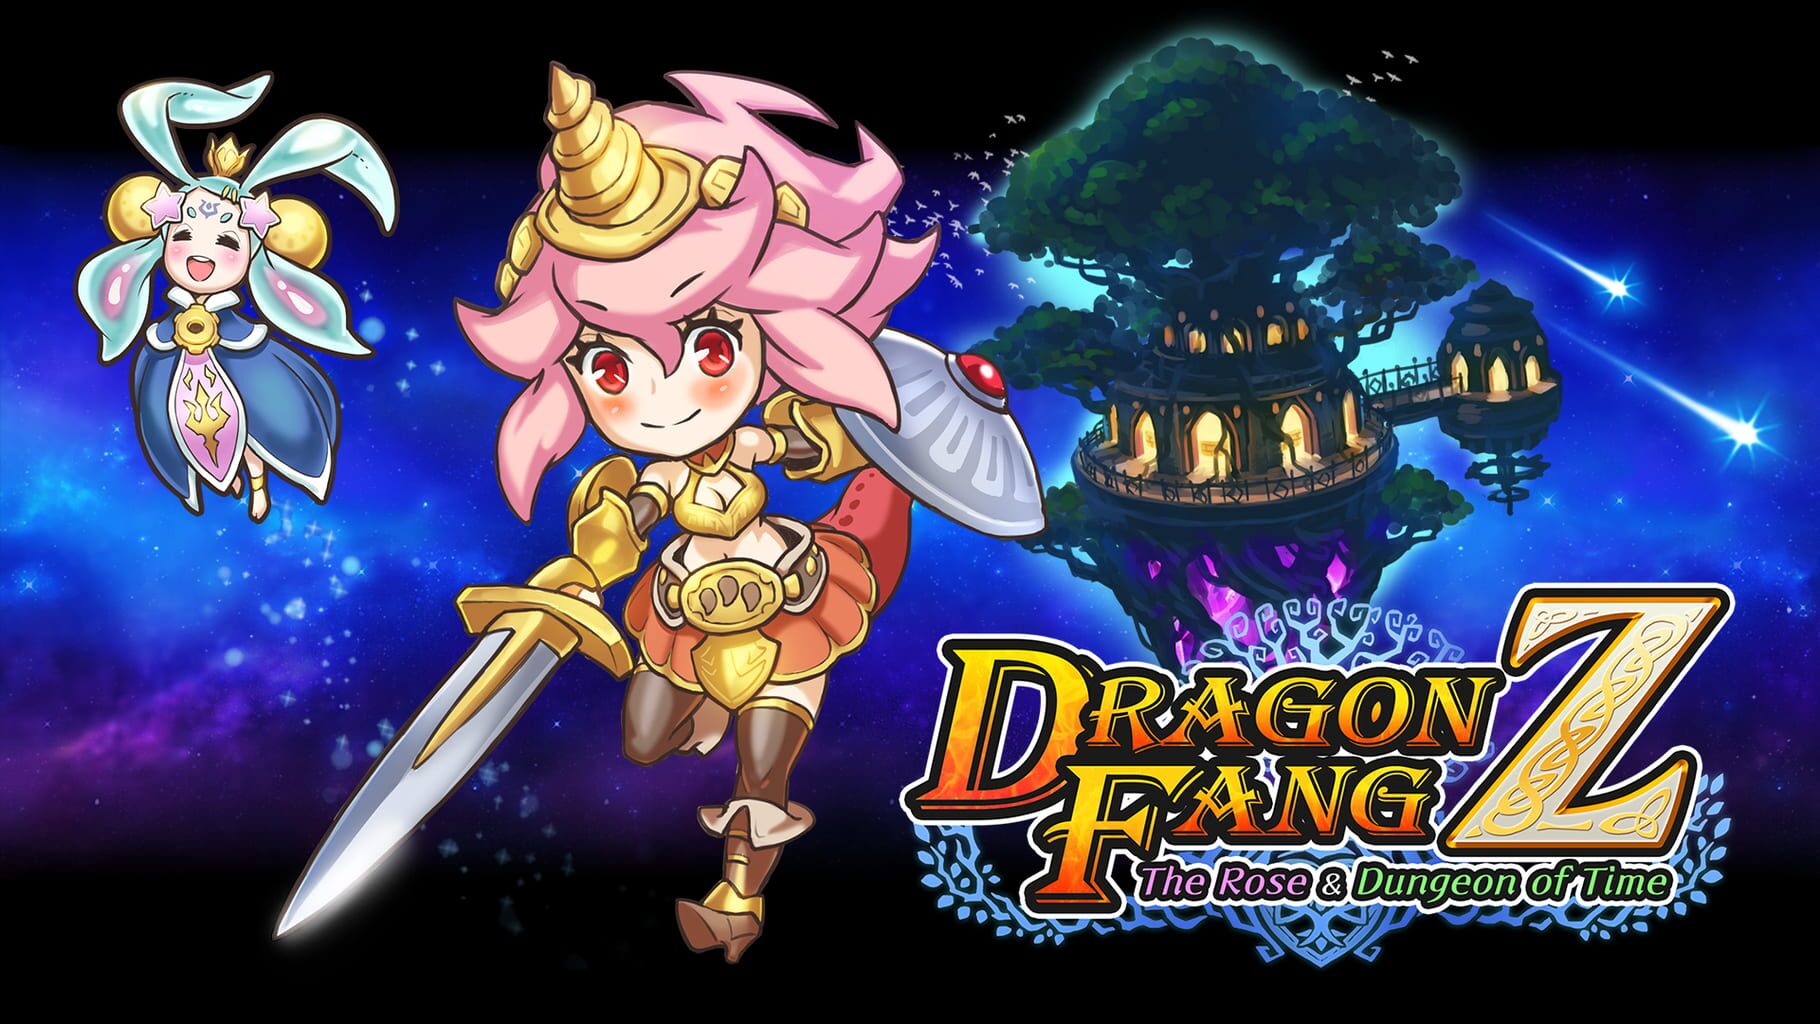 Dragon Fang Z: The Rose & Dungeon of Time artwork